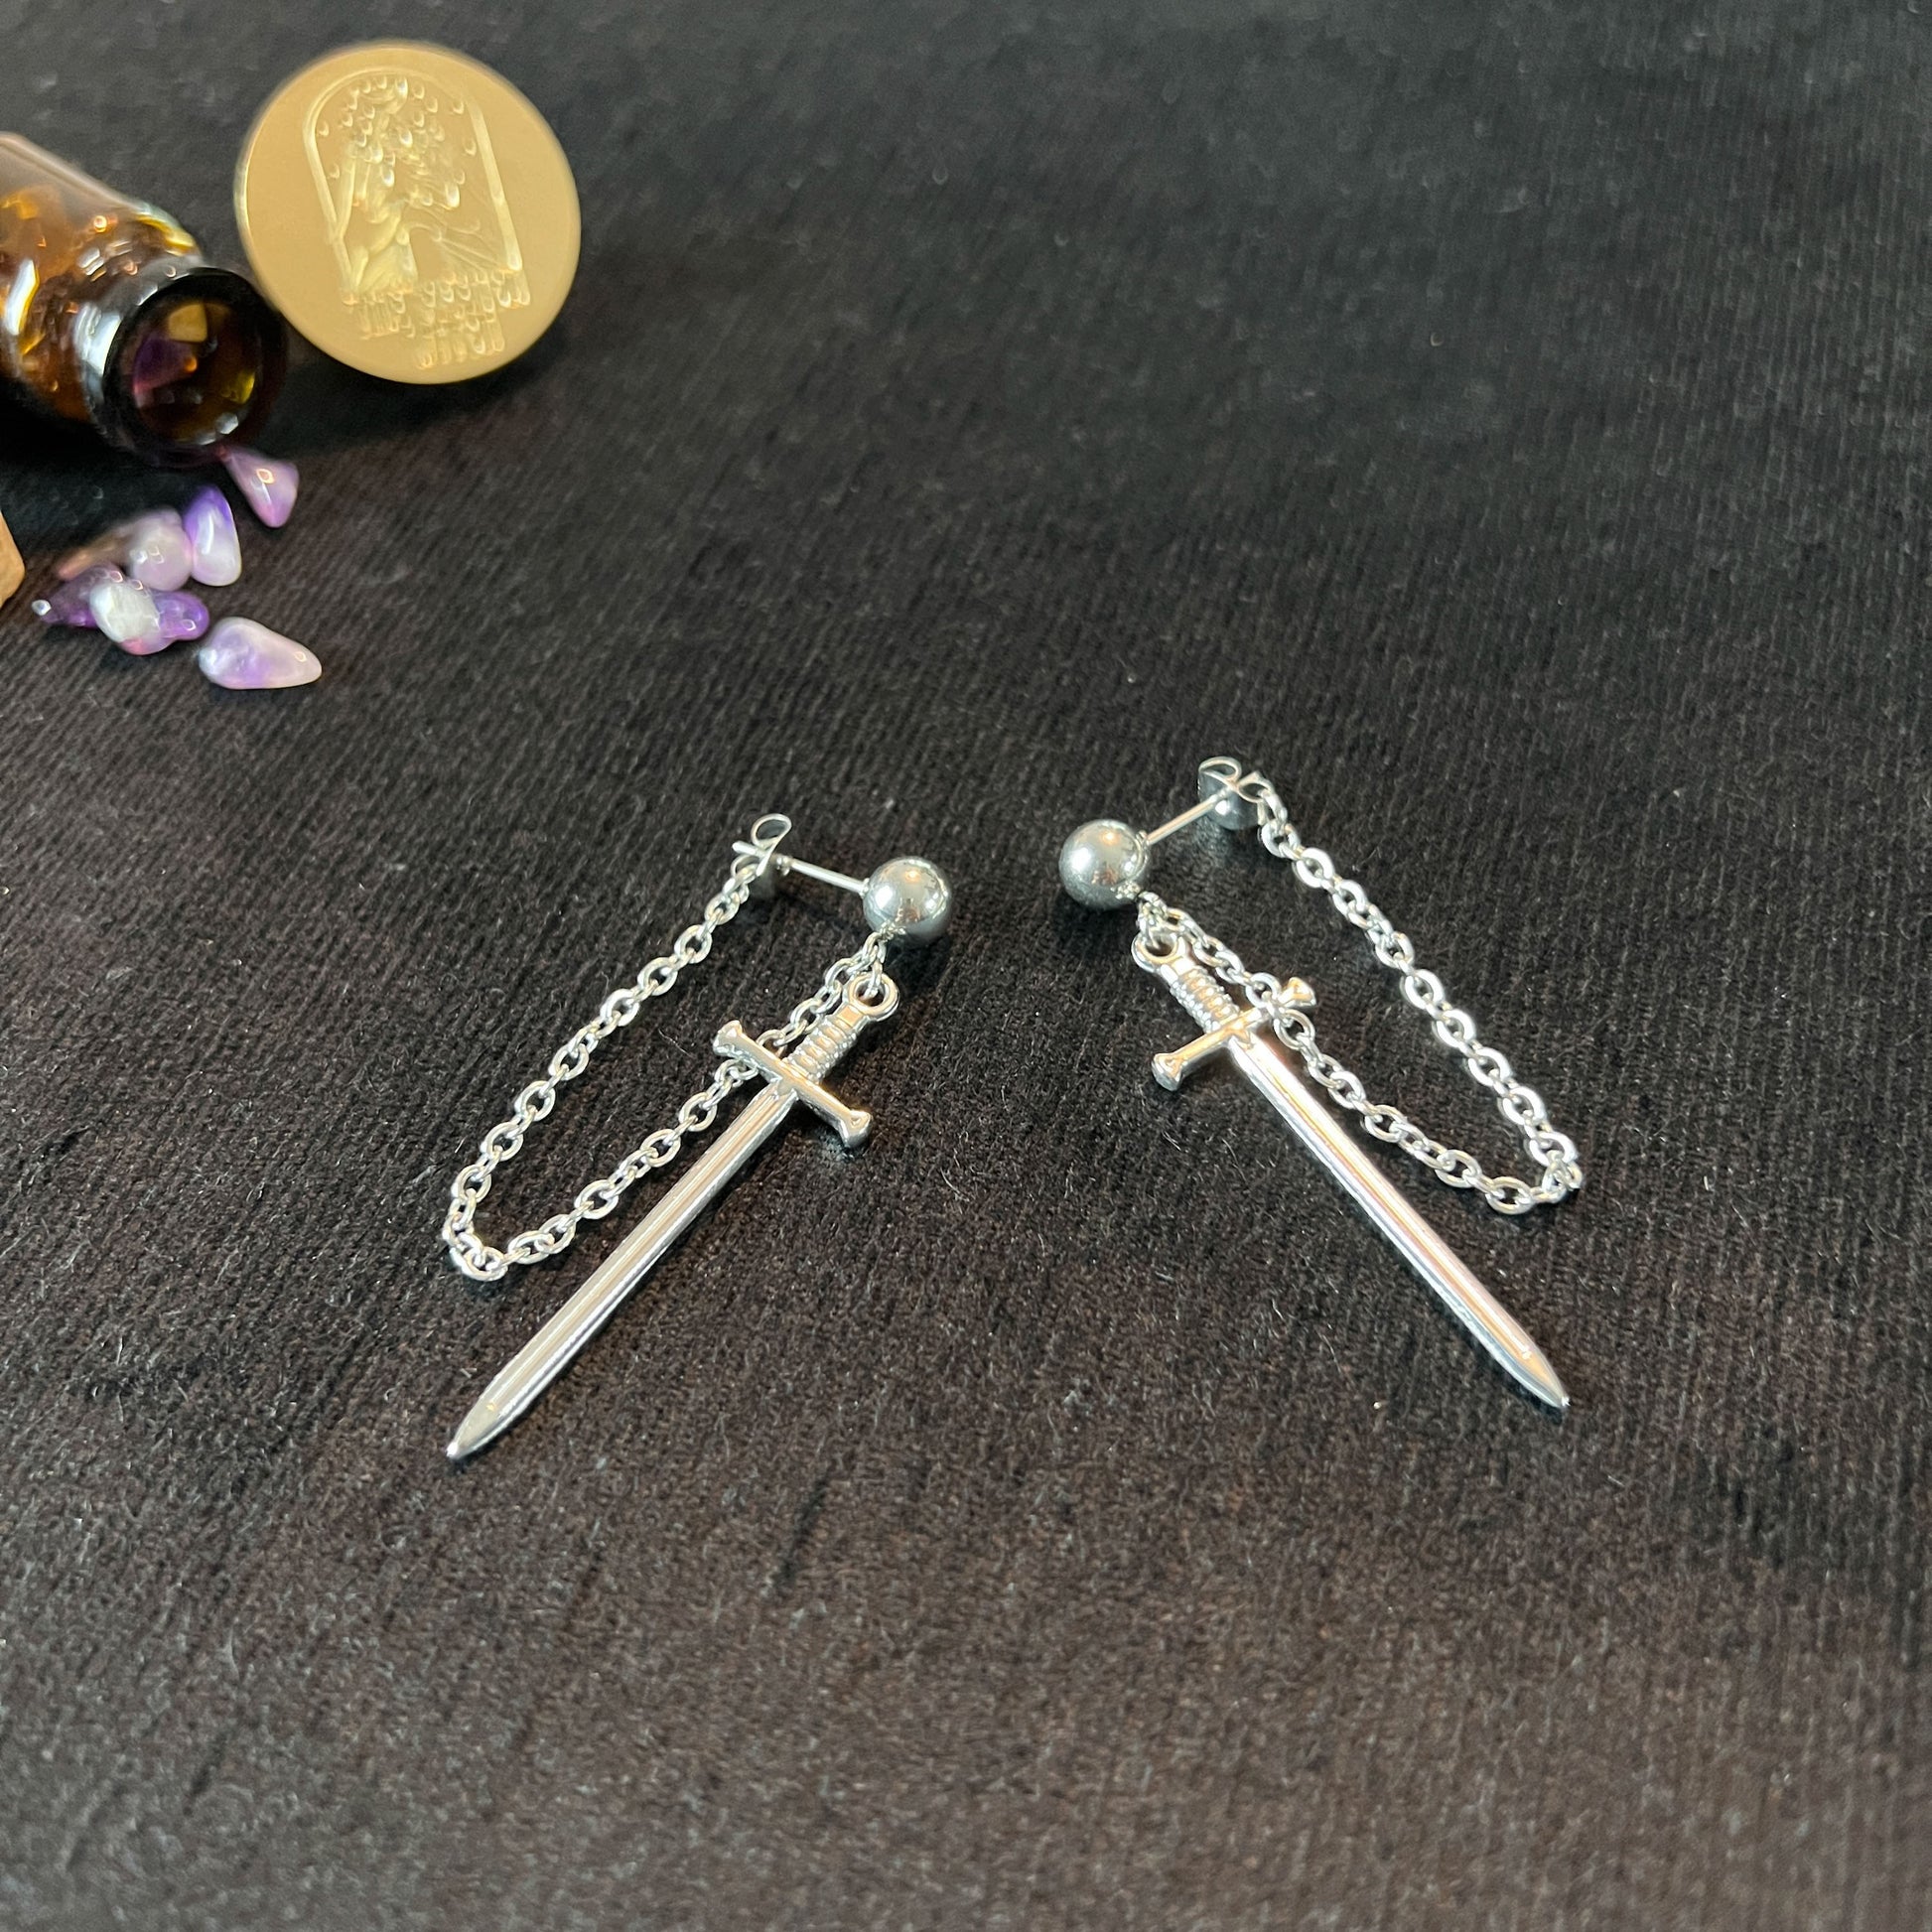 sword earrings medieval fantasy cosplay gothic punk jewelry for her and him original gift stainless steel